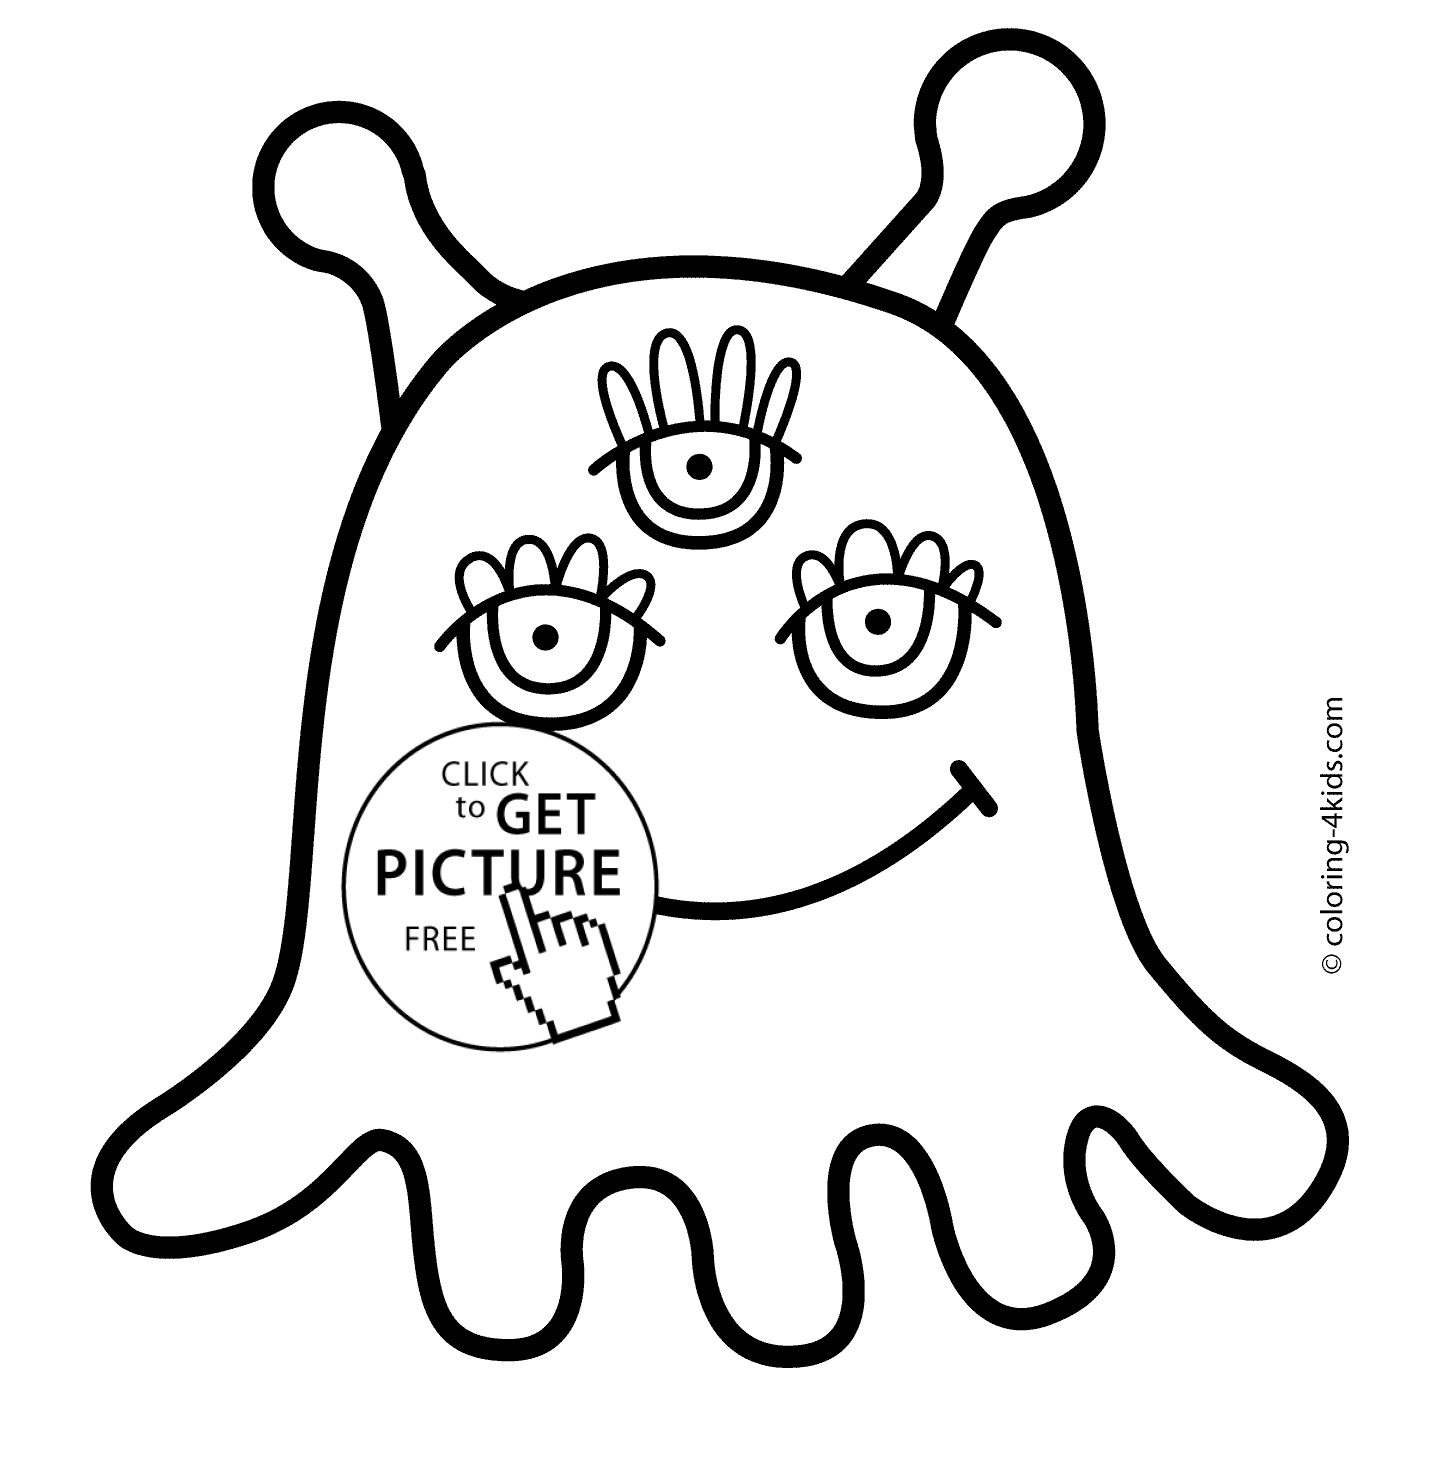 Alien coloring pages for kids, printable free